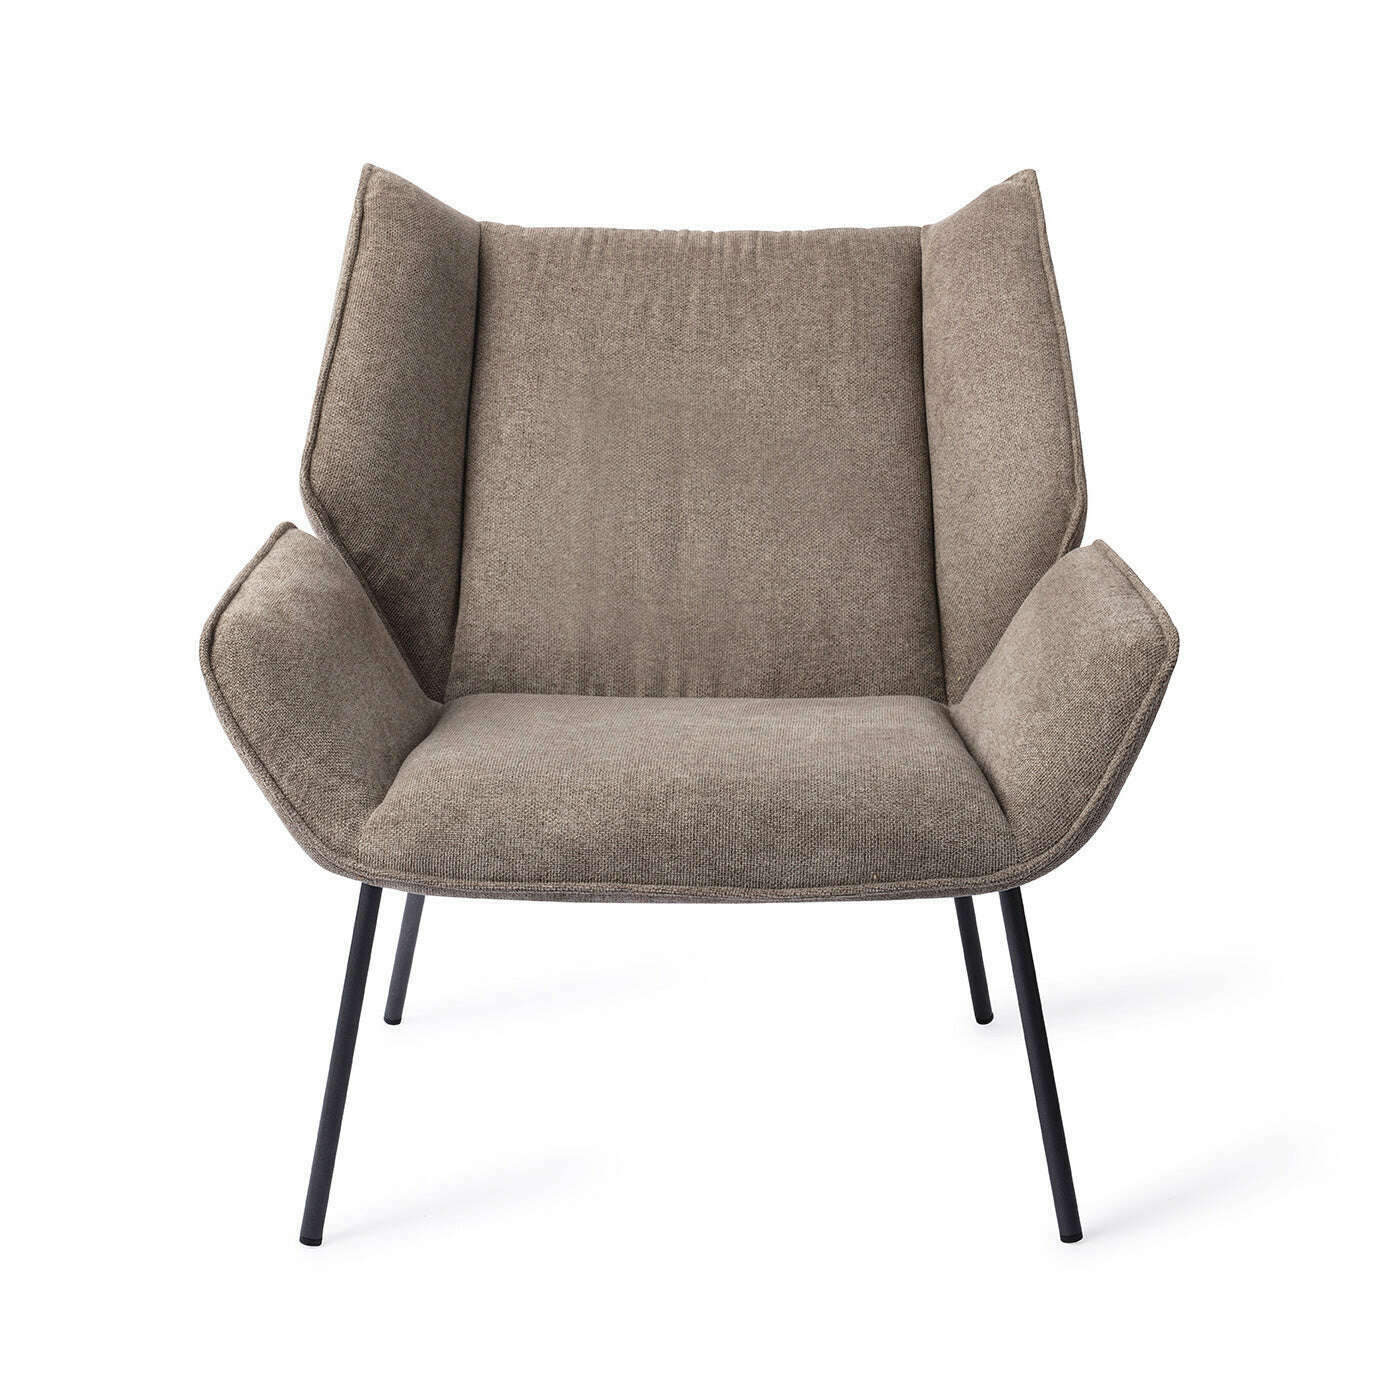 Jesper Home Haruno fauteuil taupy toffee